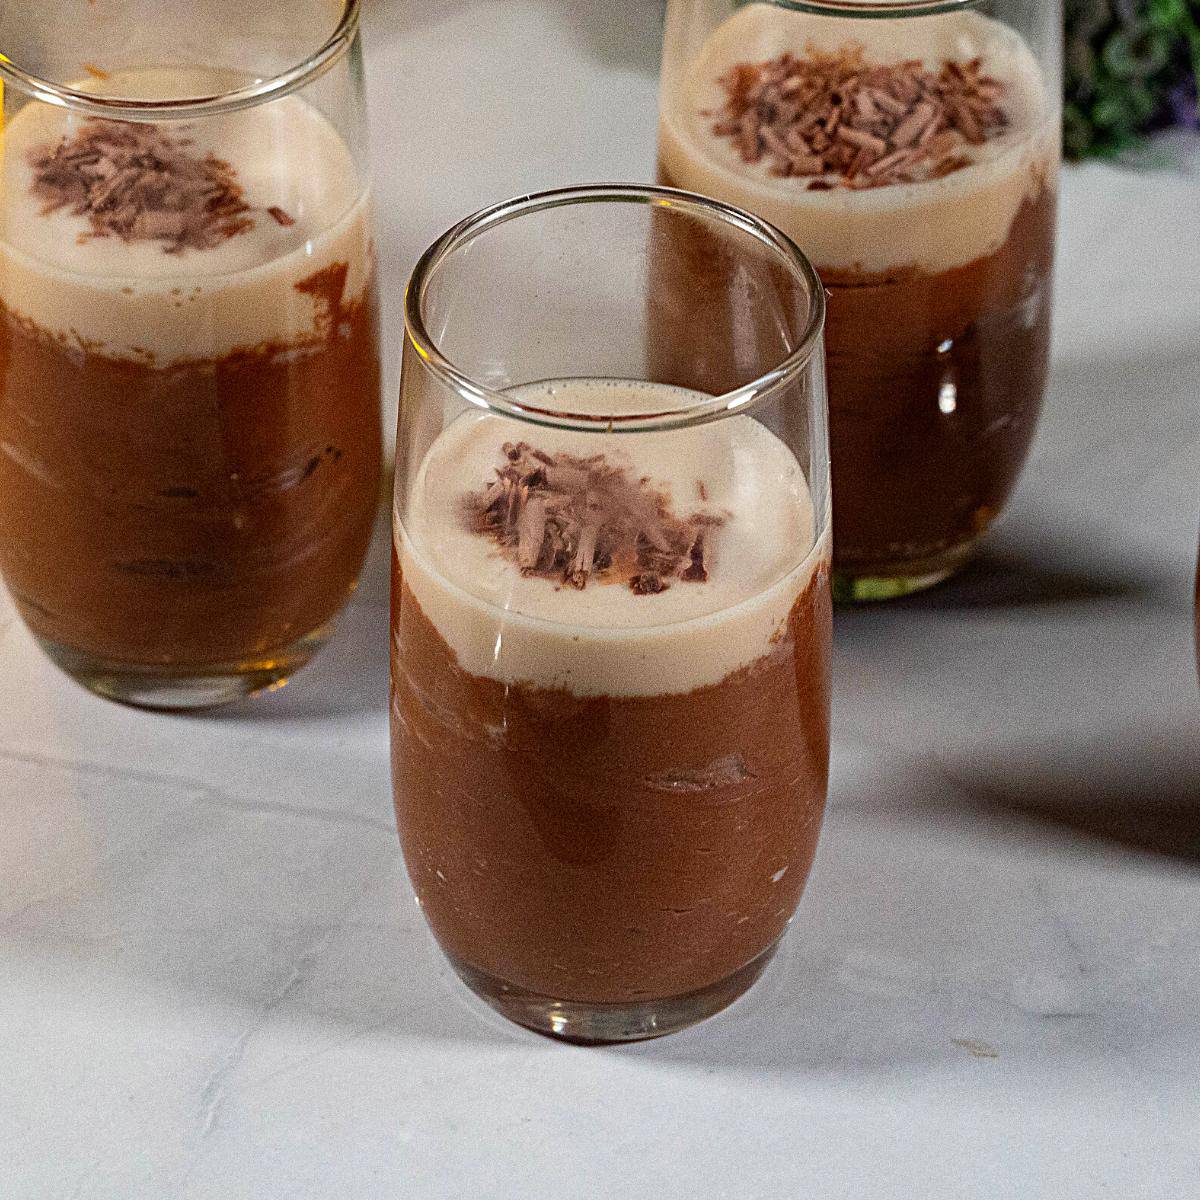 A dessert glass with chocolate mousse.